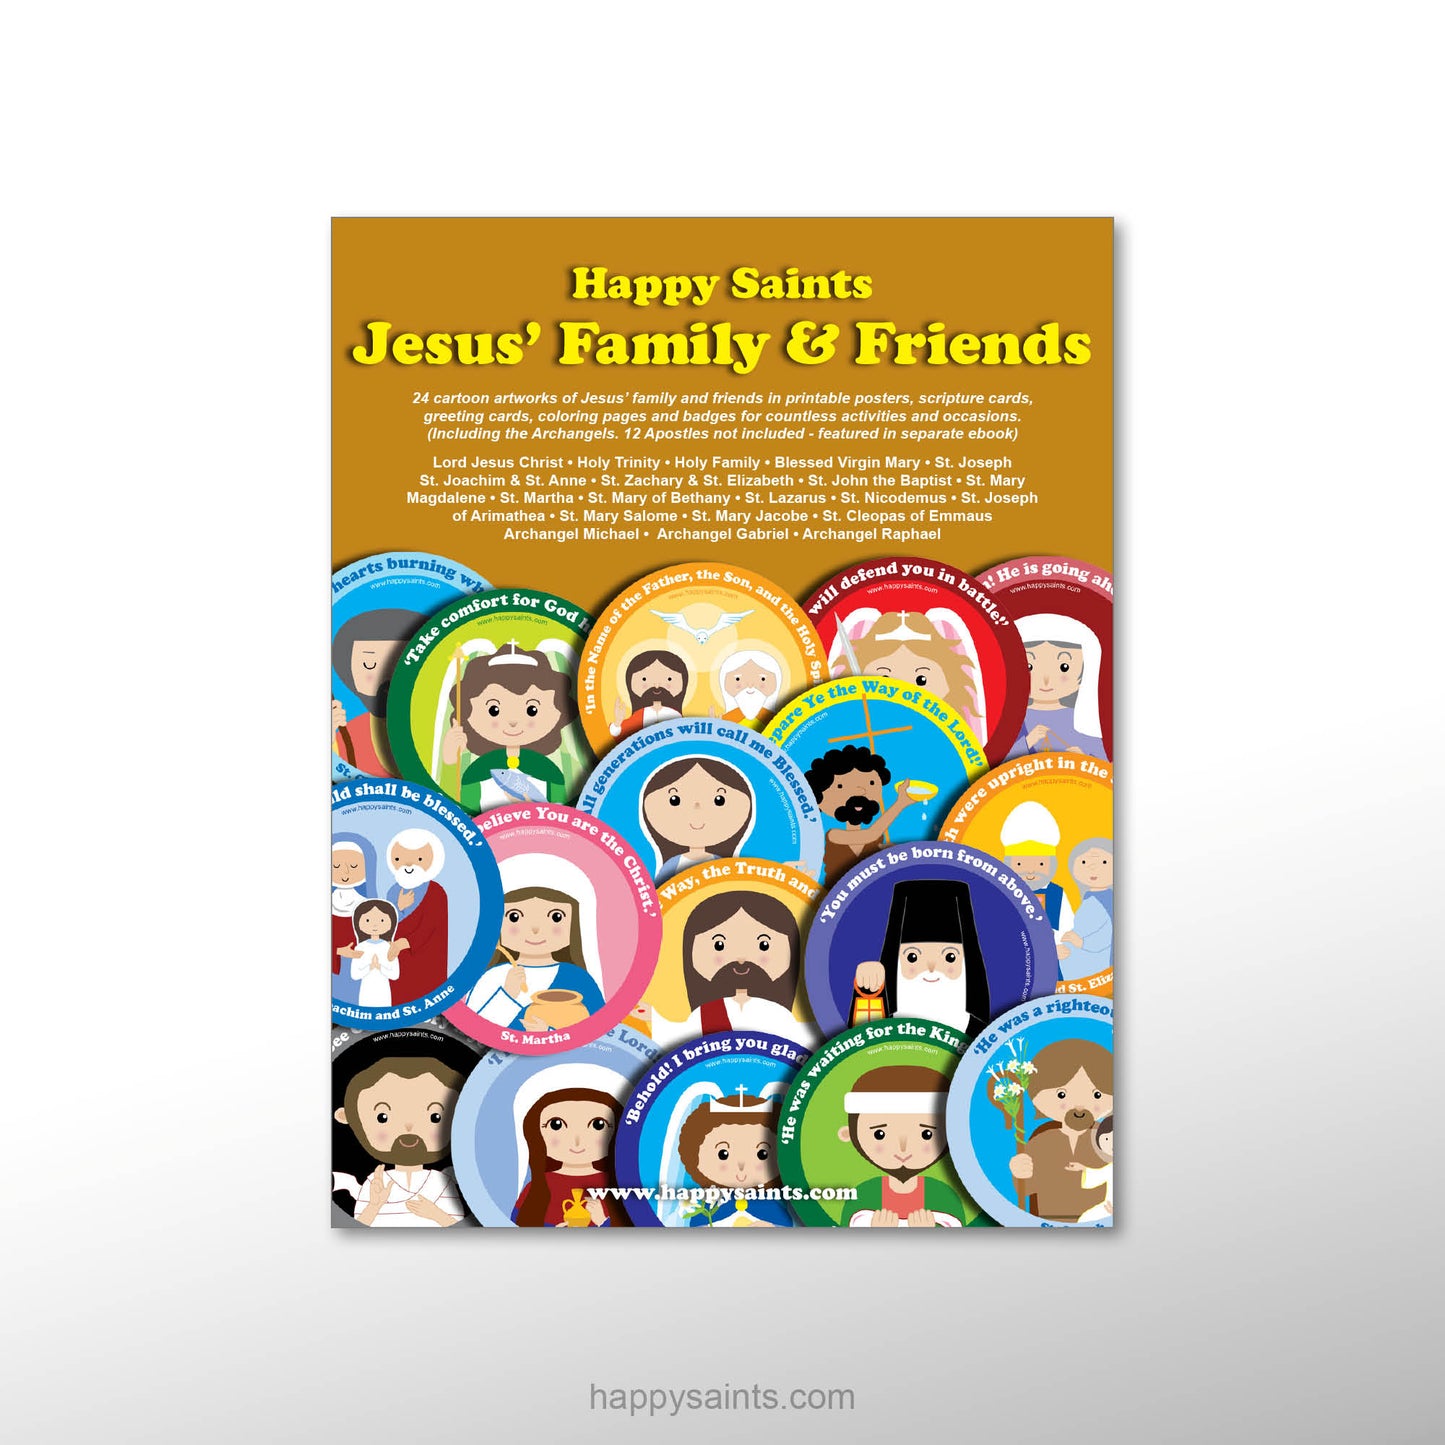 Jesus' Family and Friends